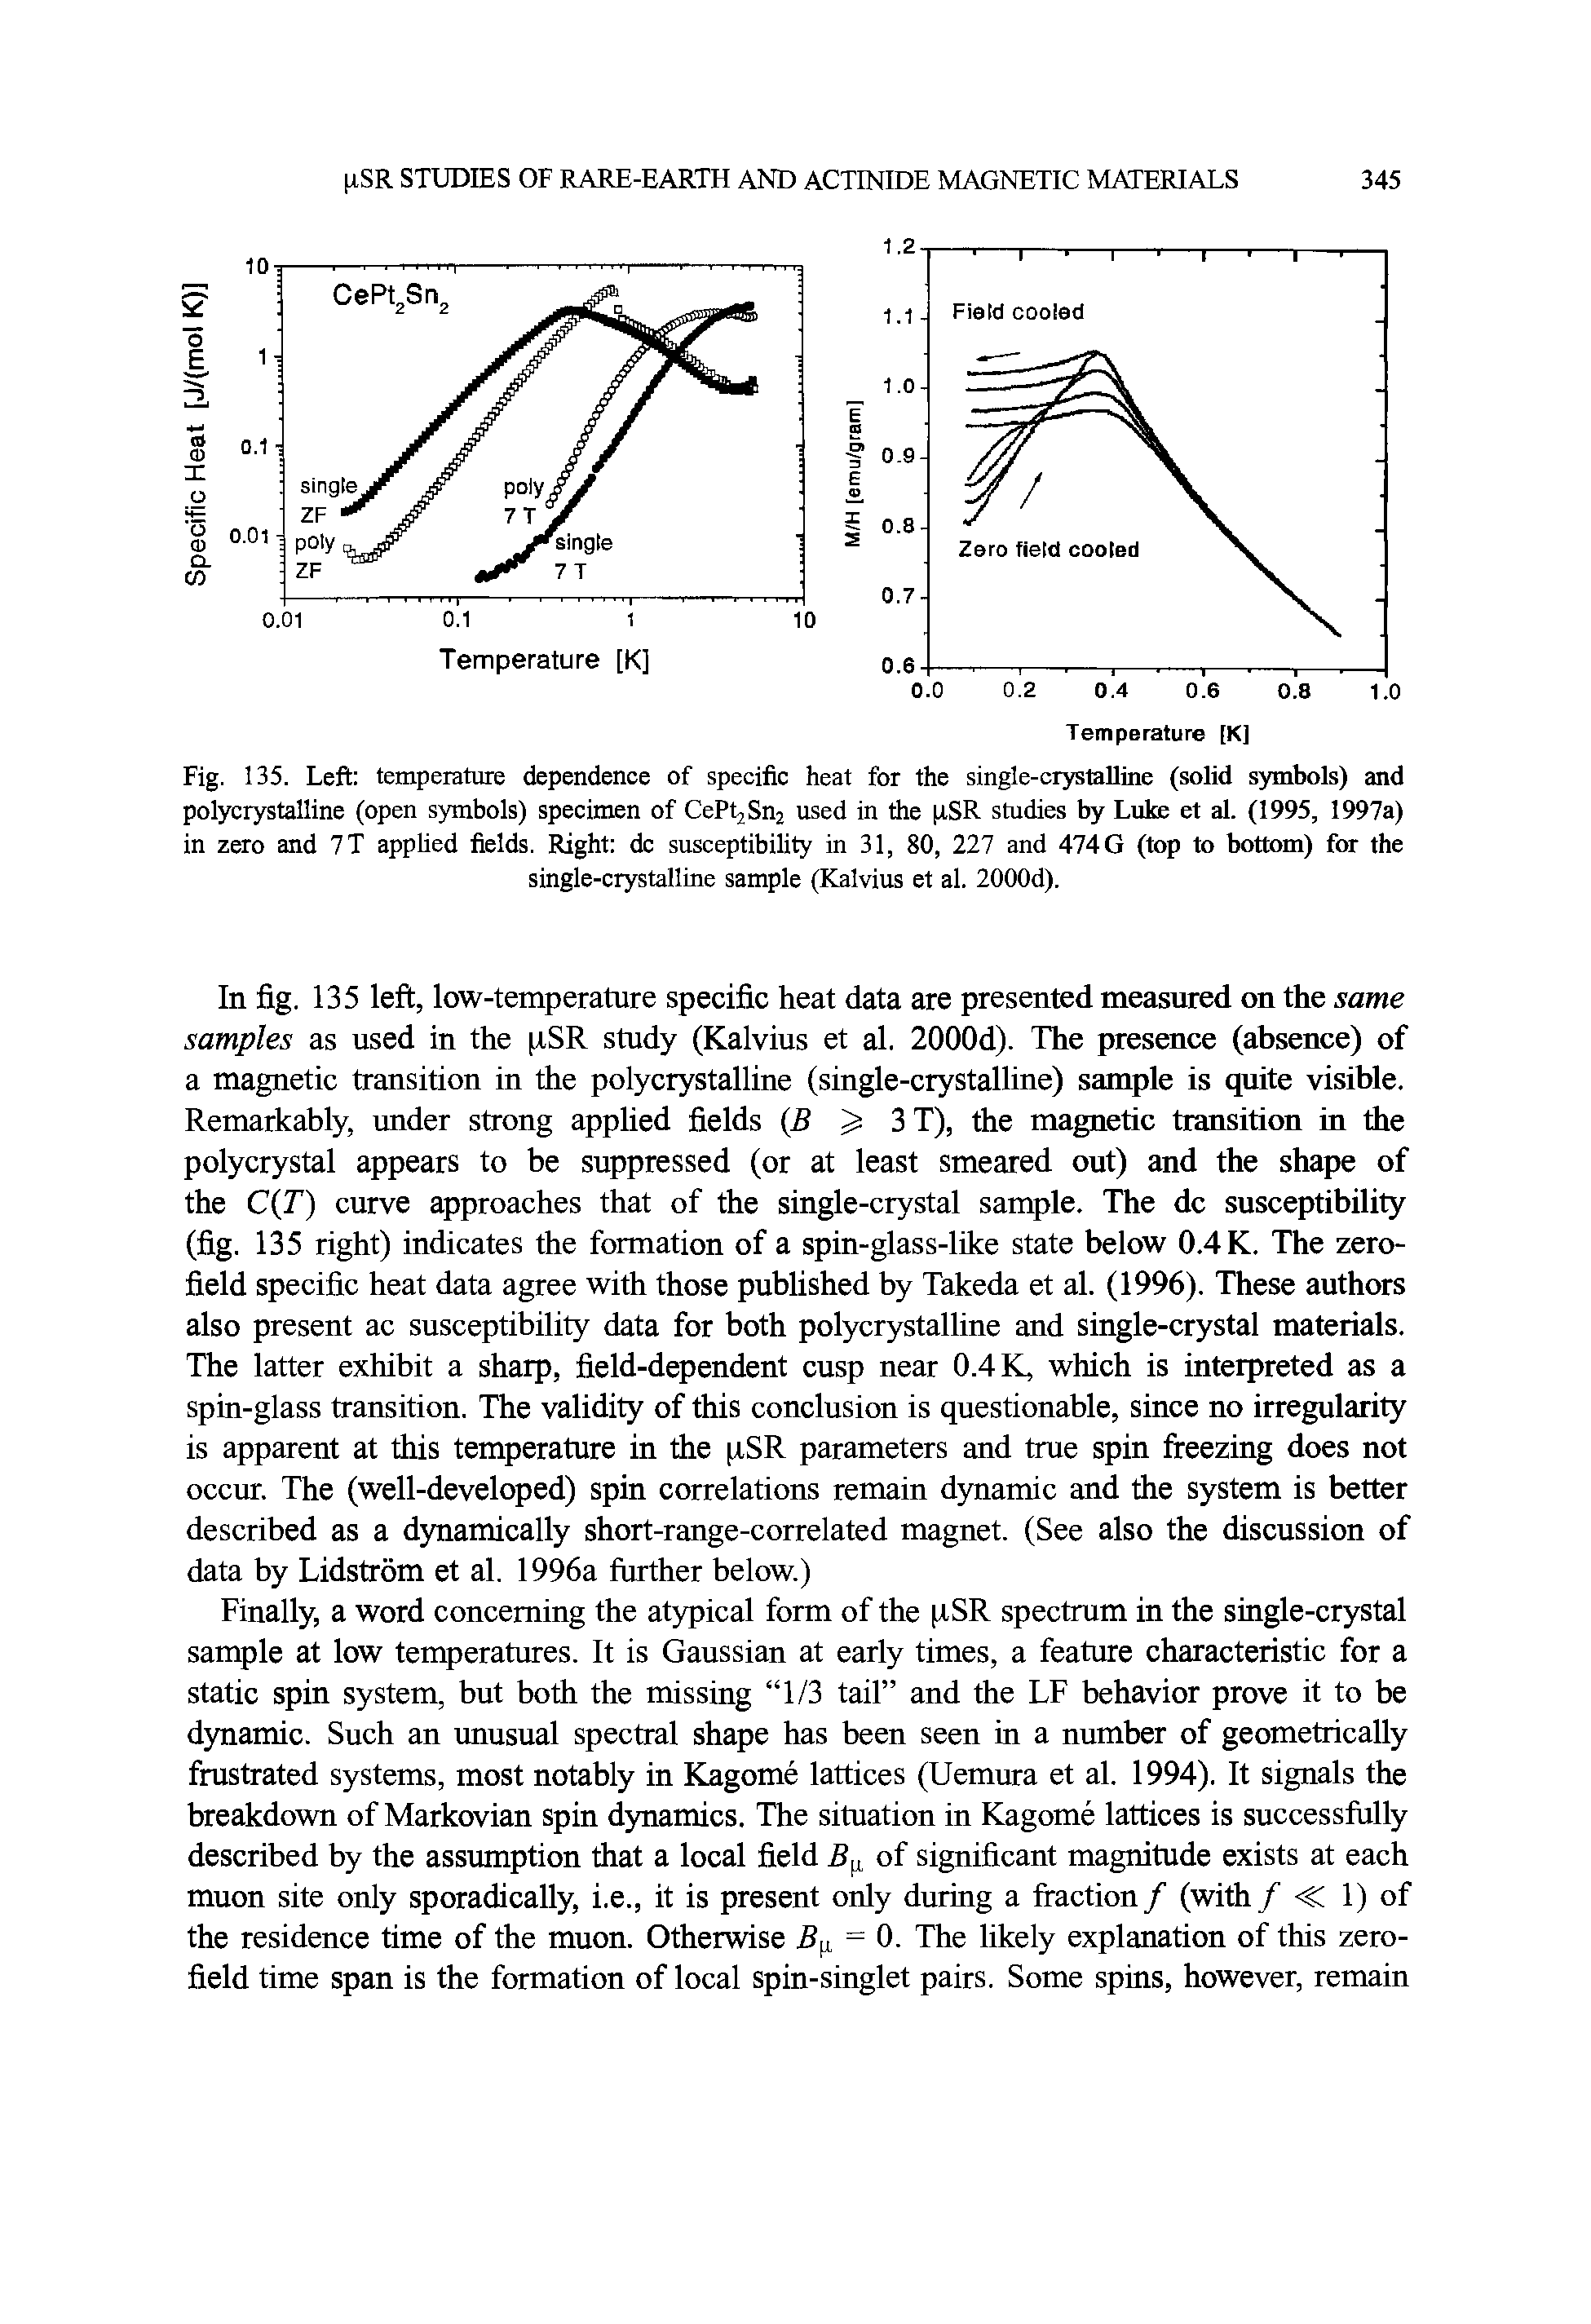 Fig. 135. Left temperature dependence of specific heat for the single-crystalline (solid symbols) and polycrystalline (open symbols) specimen of CePt2Sn2 used in the J.SR studies by Luke et al. (1995, 1997a) in zero and 7T apphed fields. Right do susceptibility in 31, 80, 227 and 474 G (top to bottom) for the single-crystalline sample (Kalvius et al. 2000d).